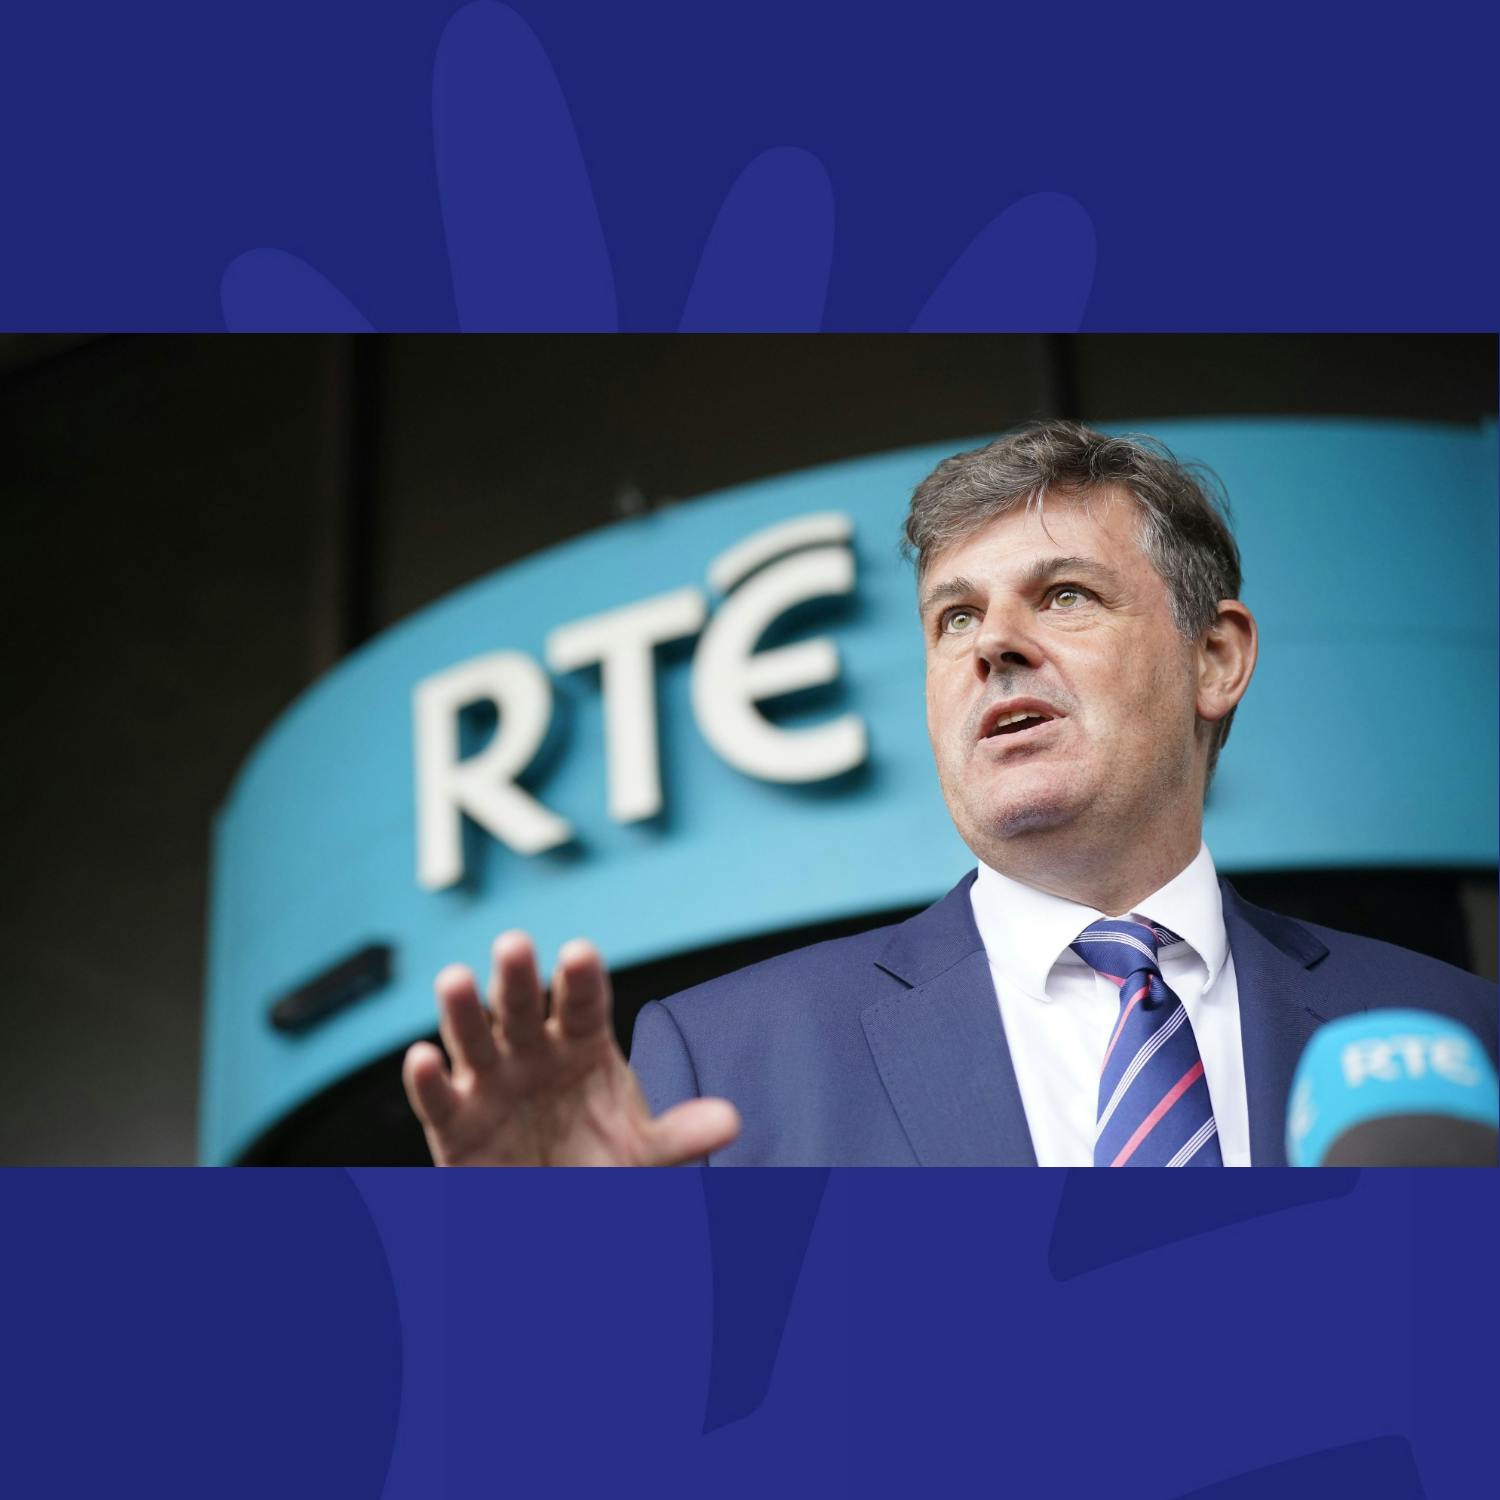 RTÉ DIRECTOR GENERAL OUTLINES NEW STRATEGY FOR BROADCASTER